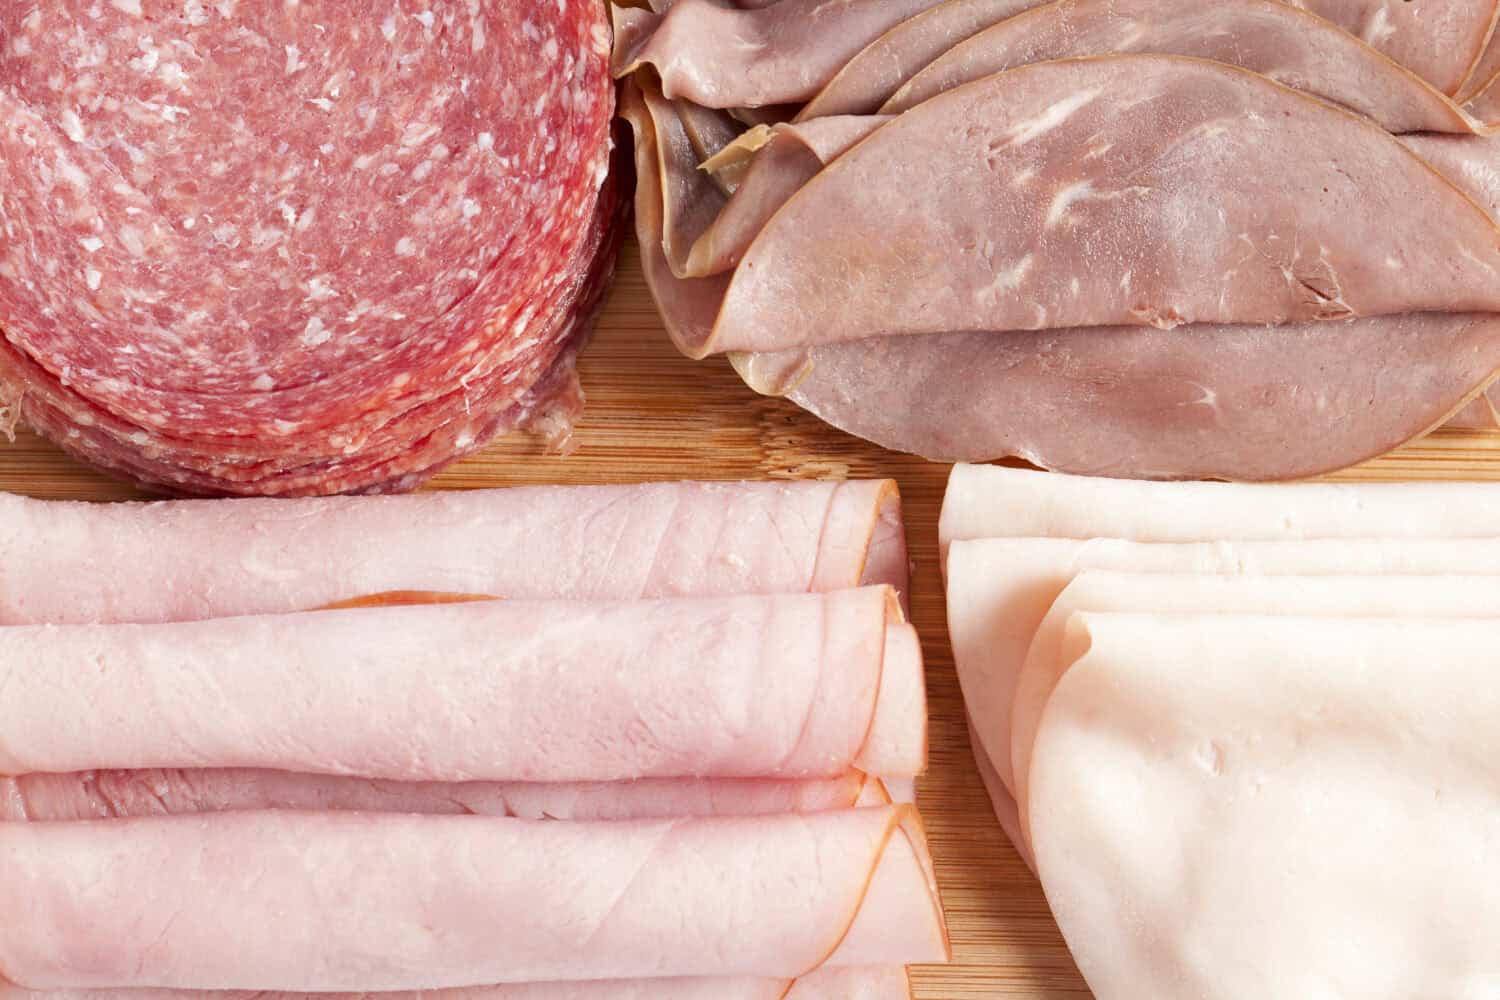 Assorted sliced meat in a macro image